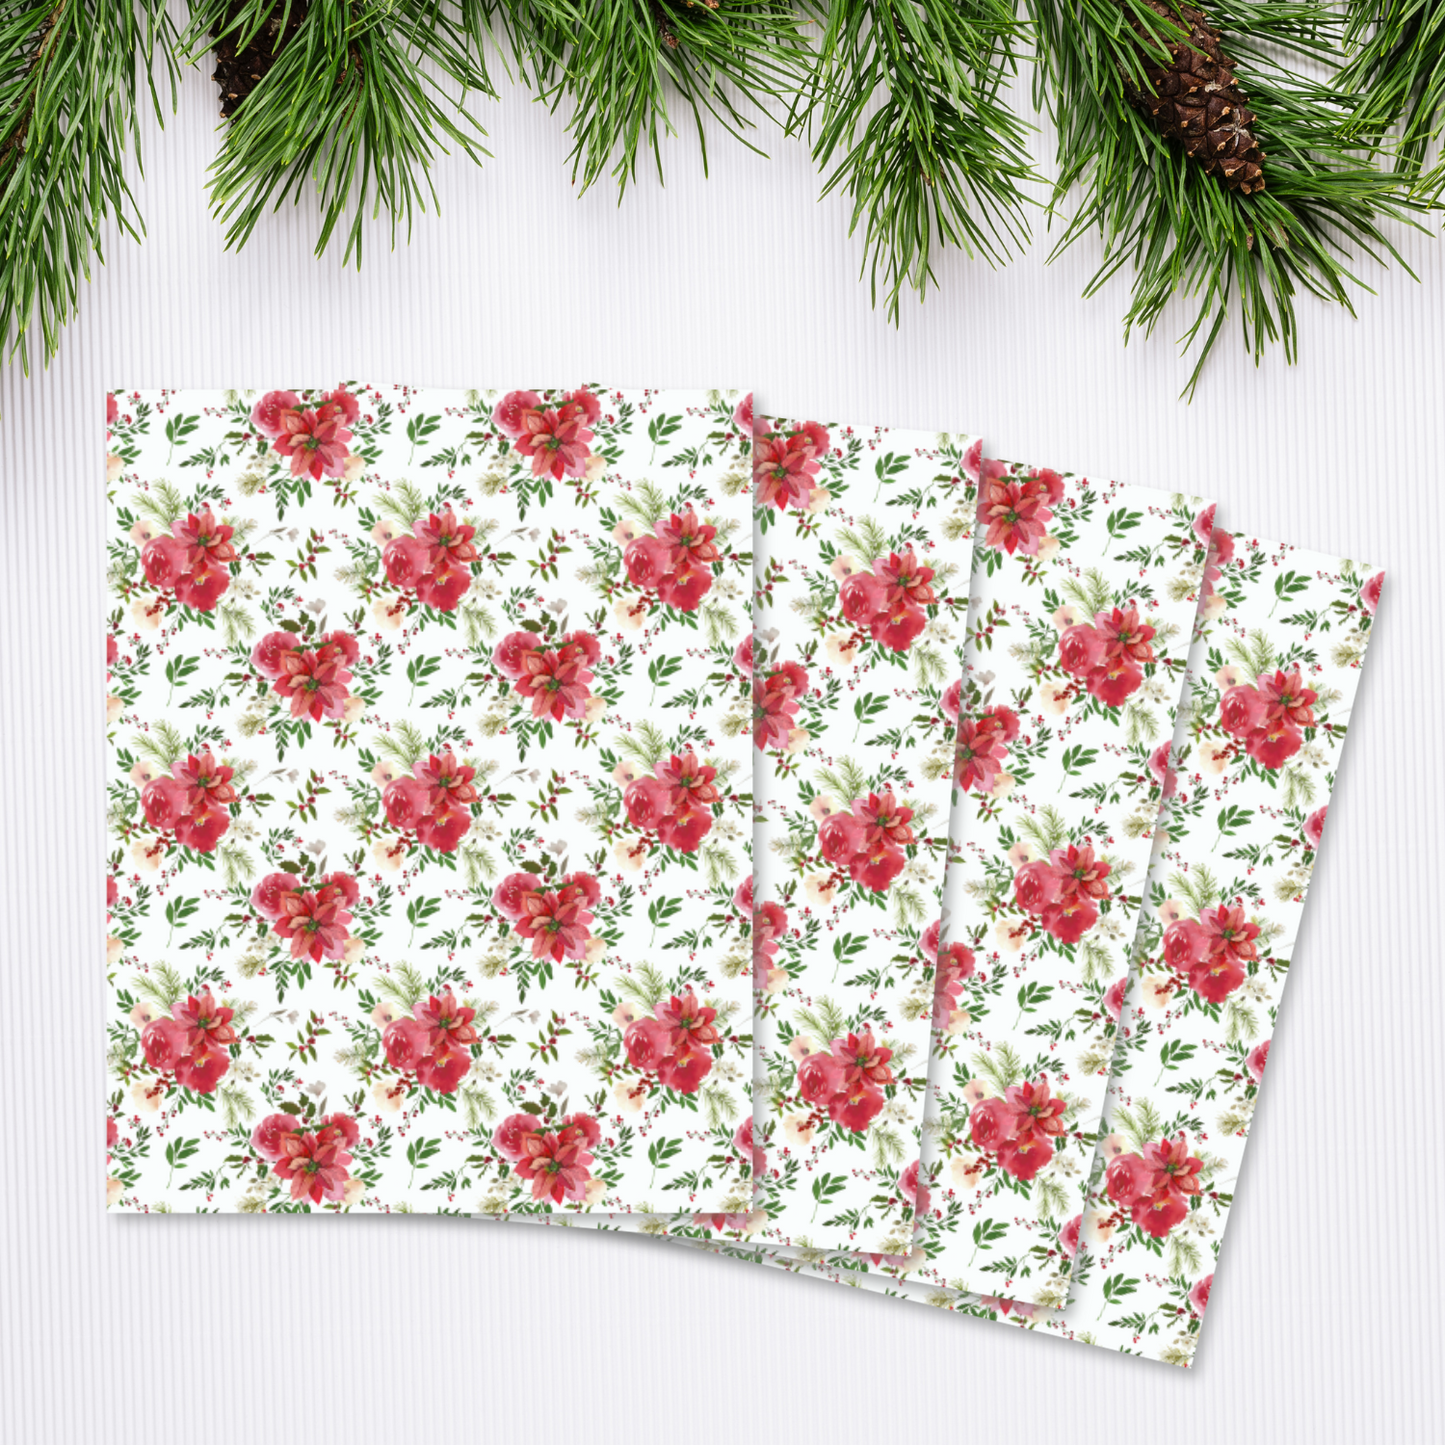  Festive Poinsettia patterned transfer sheet for clay crafts.